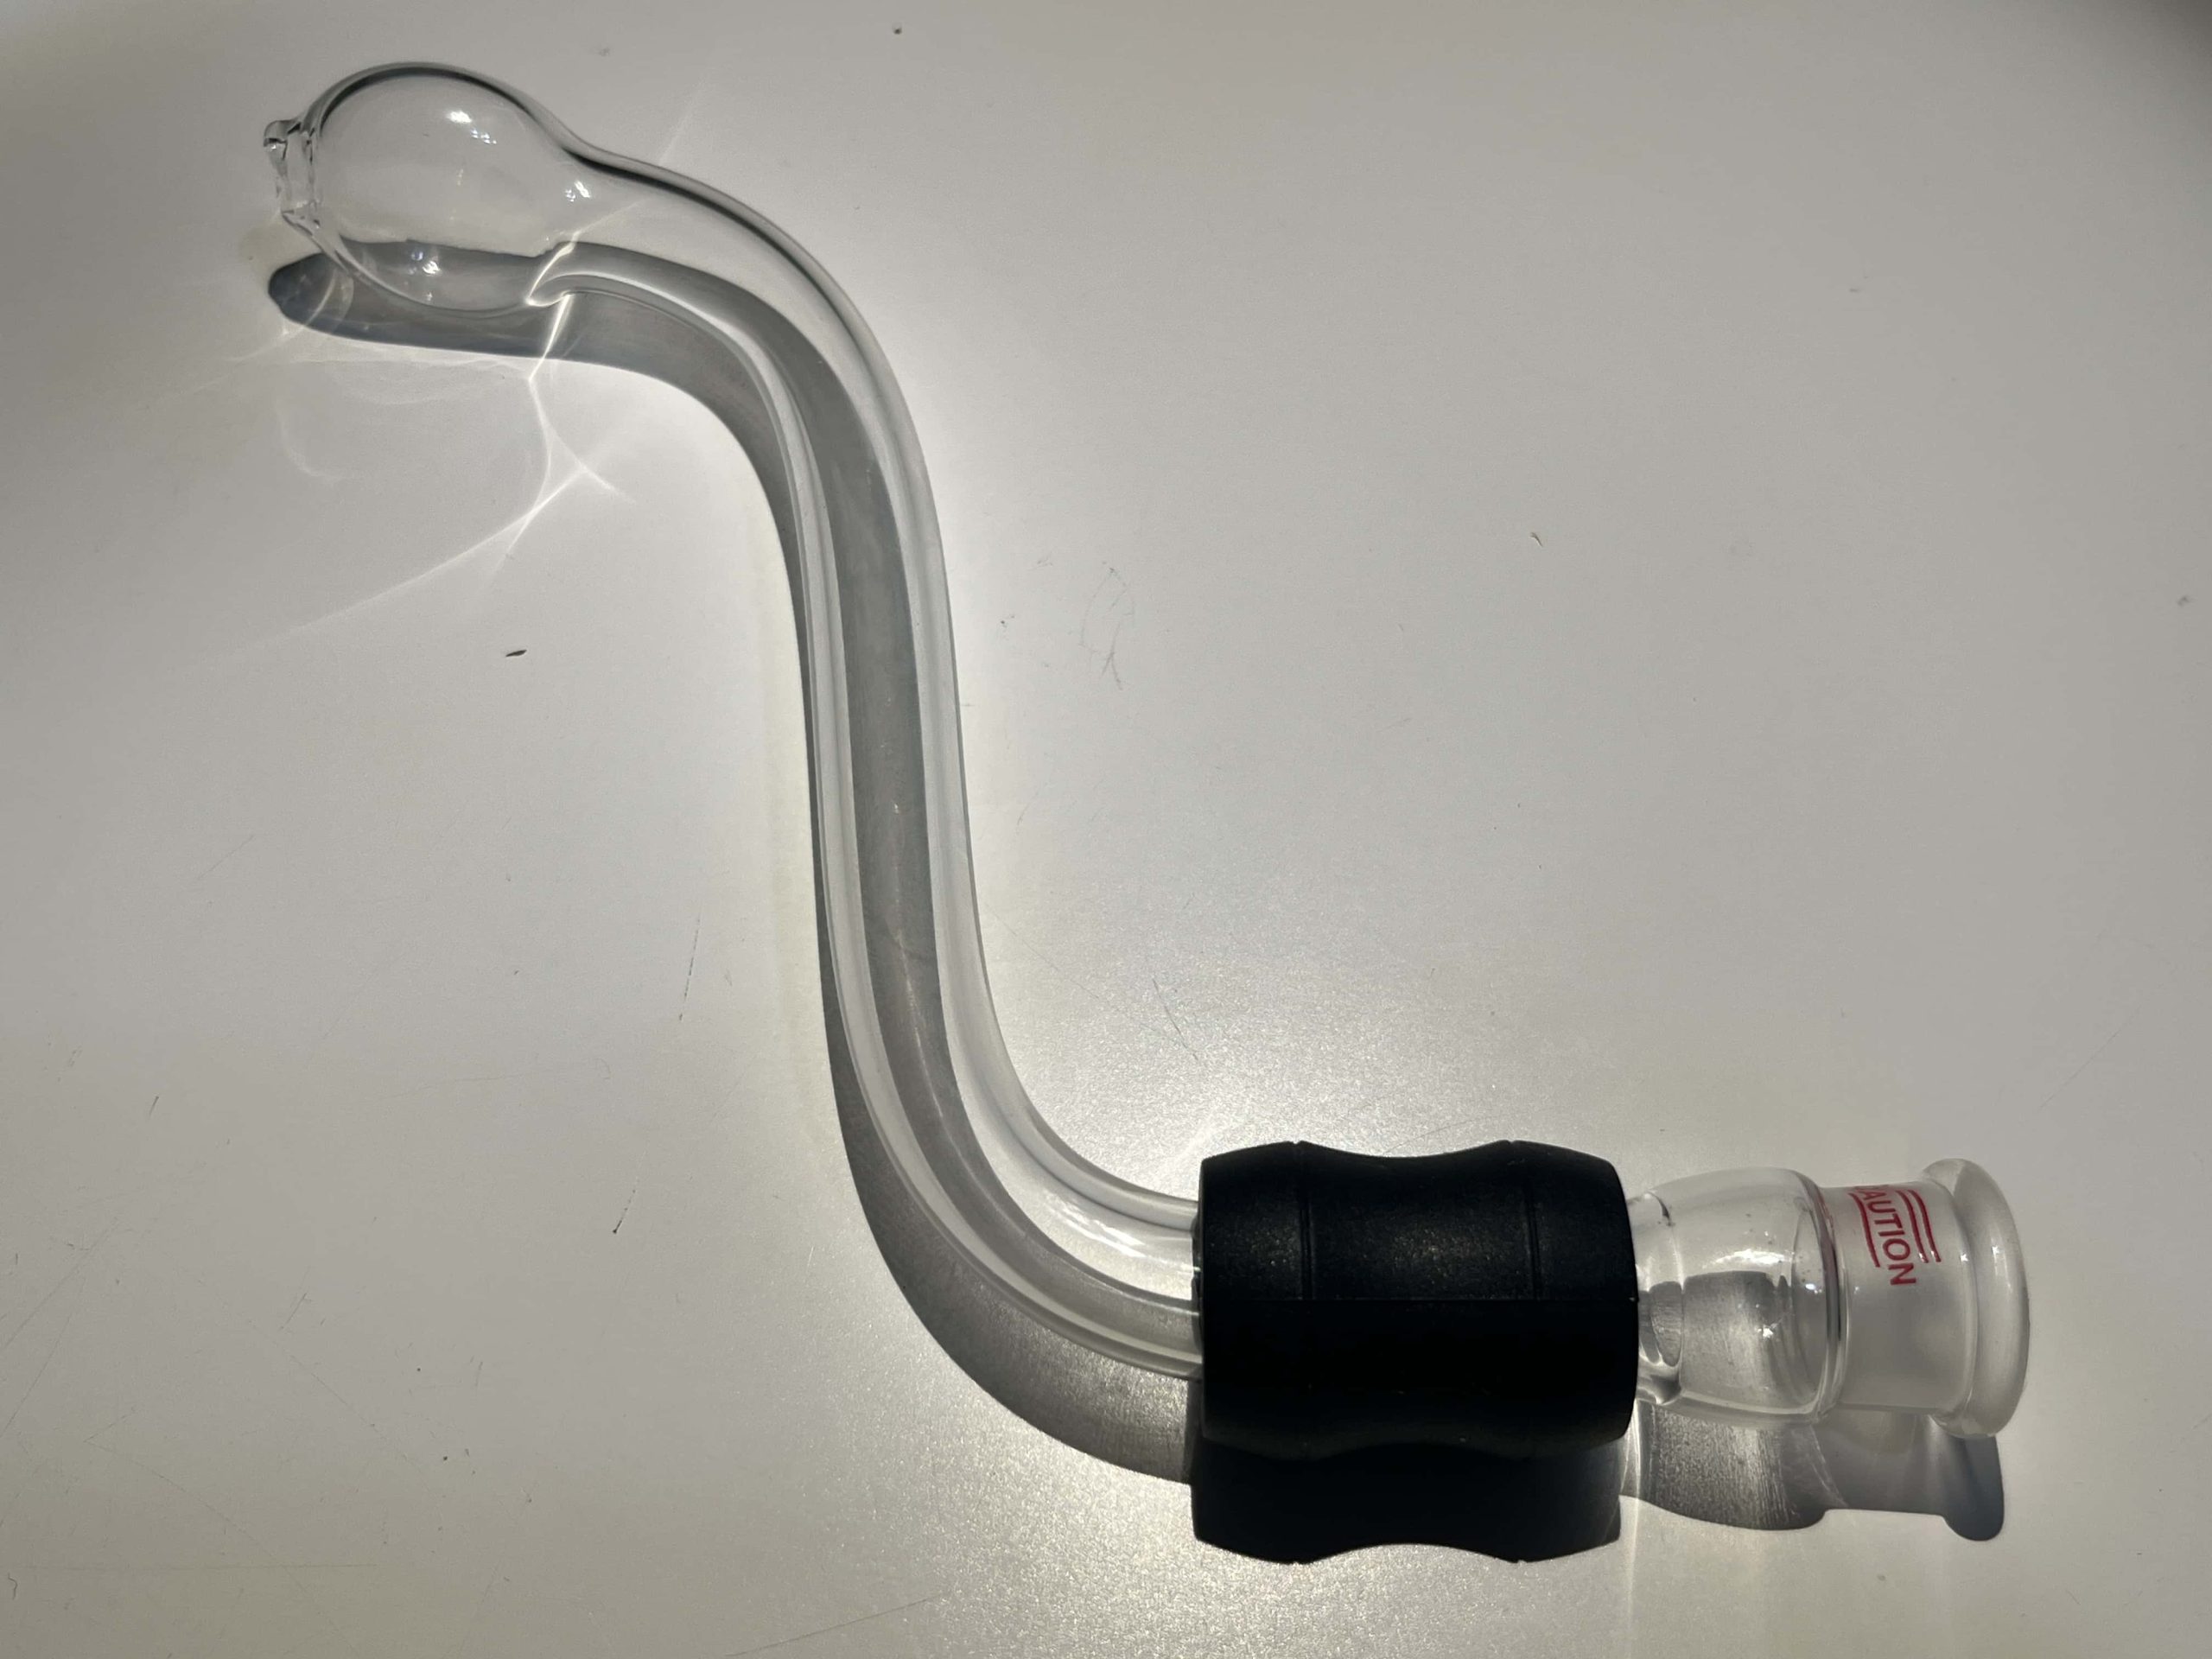 Nearly All-Glass mouthpiece